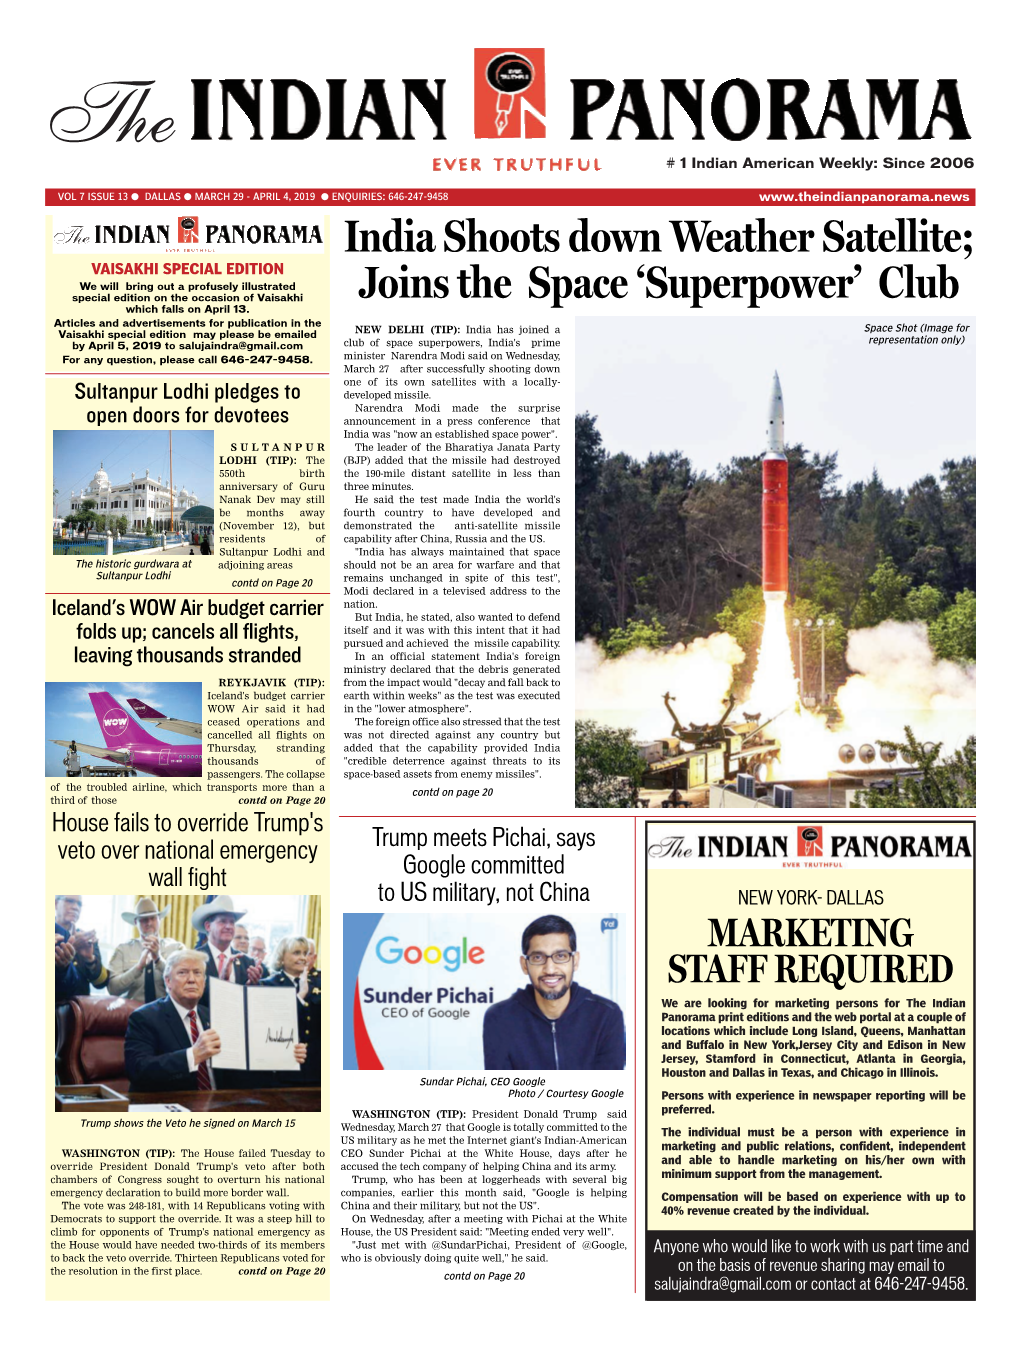 India Shoots Down Weather Satellite; Joins The